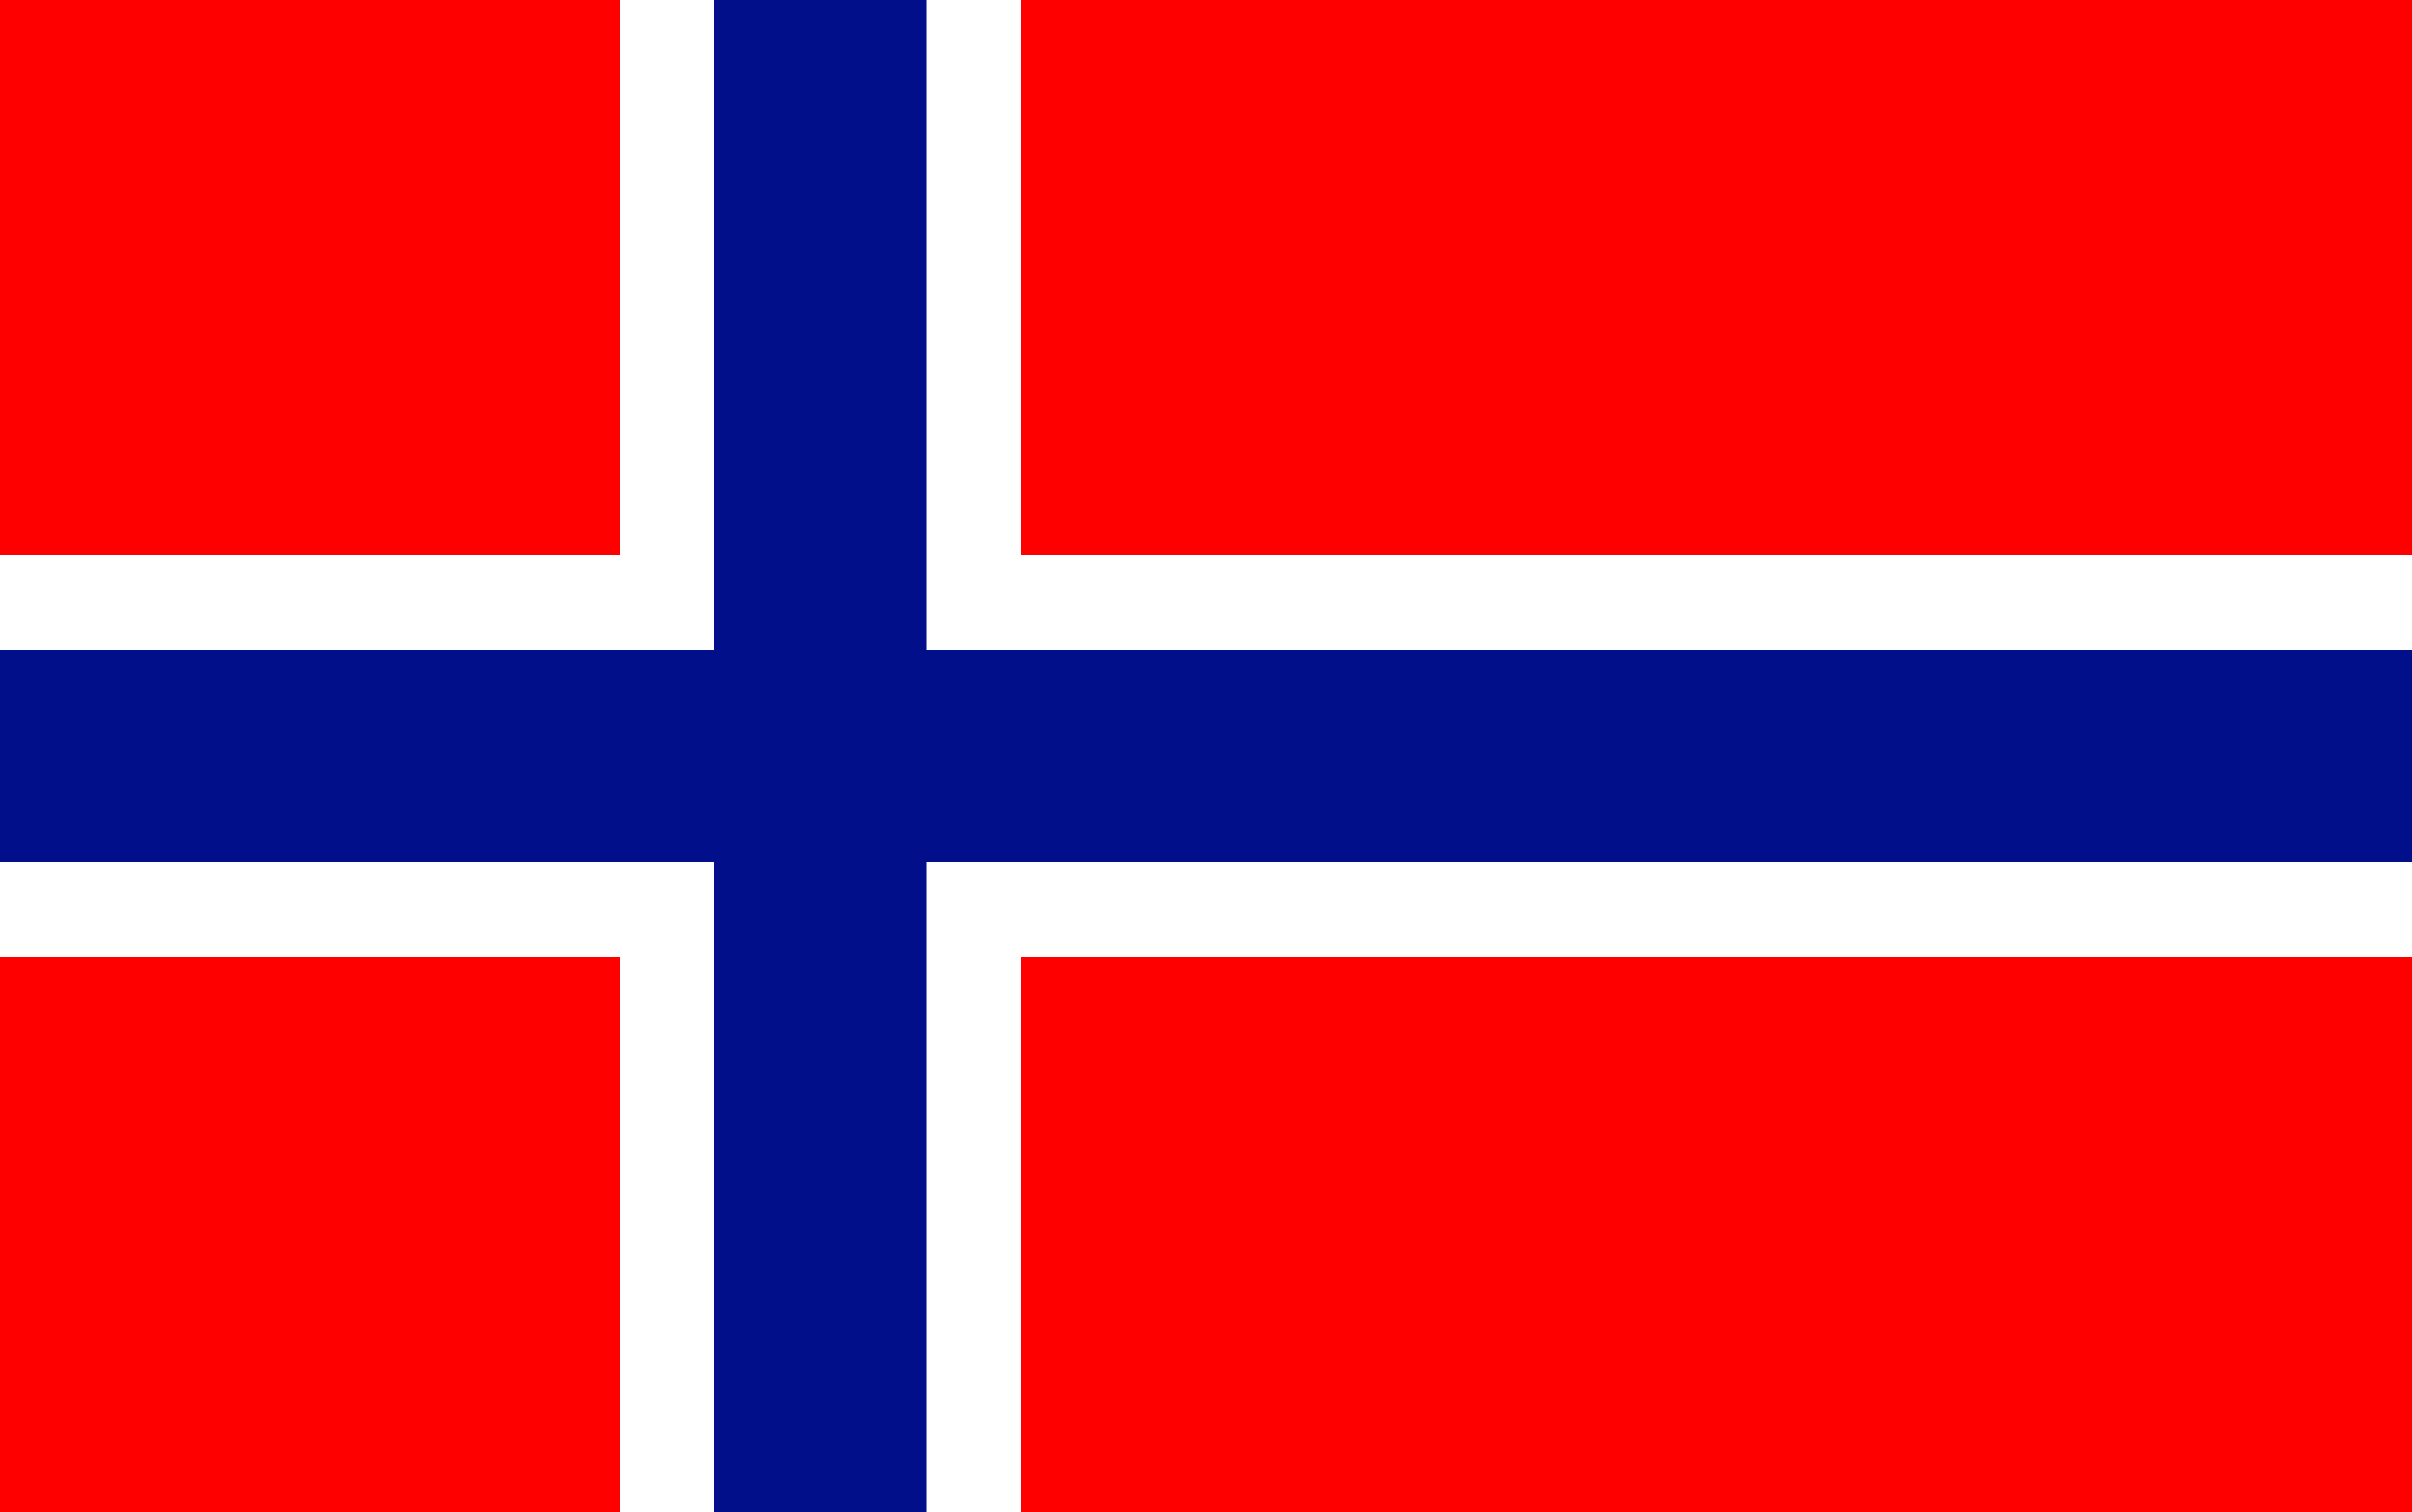 flag with white cross and red background